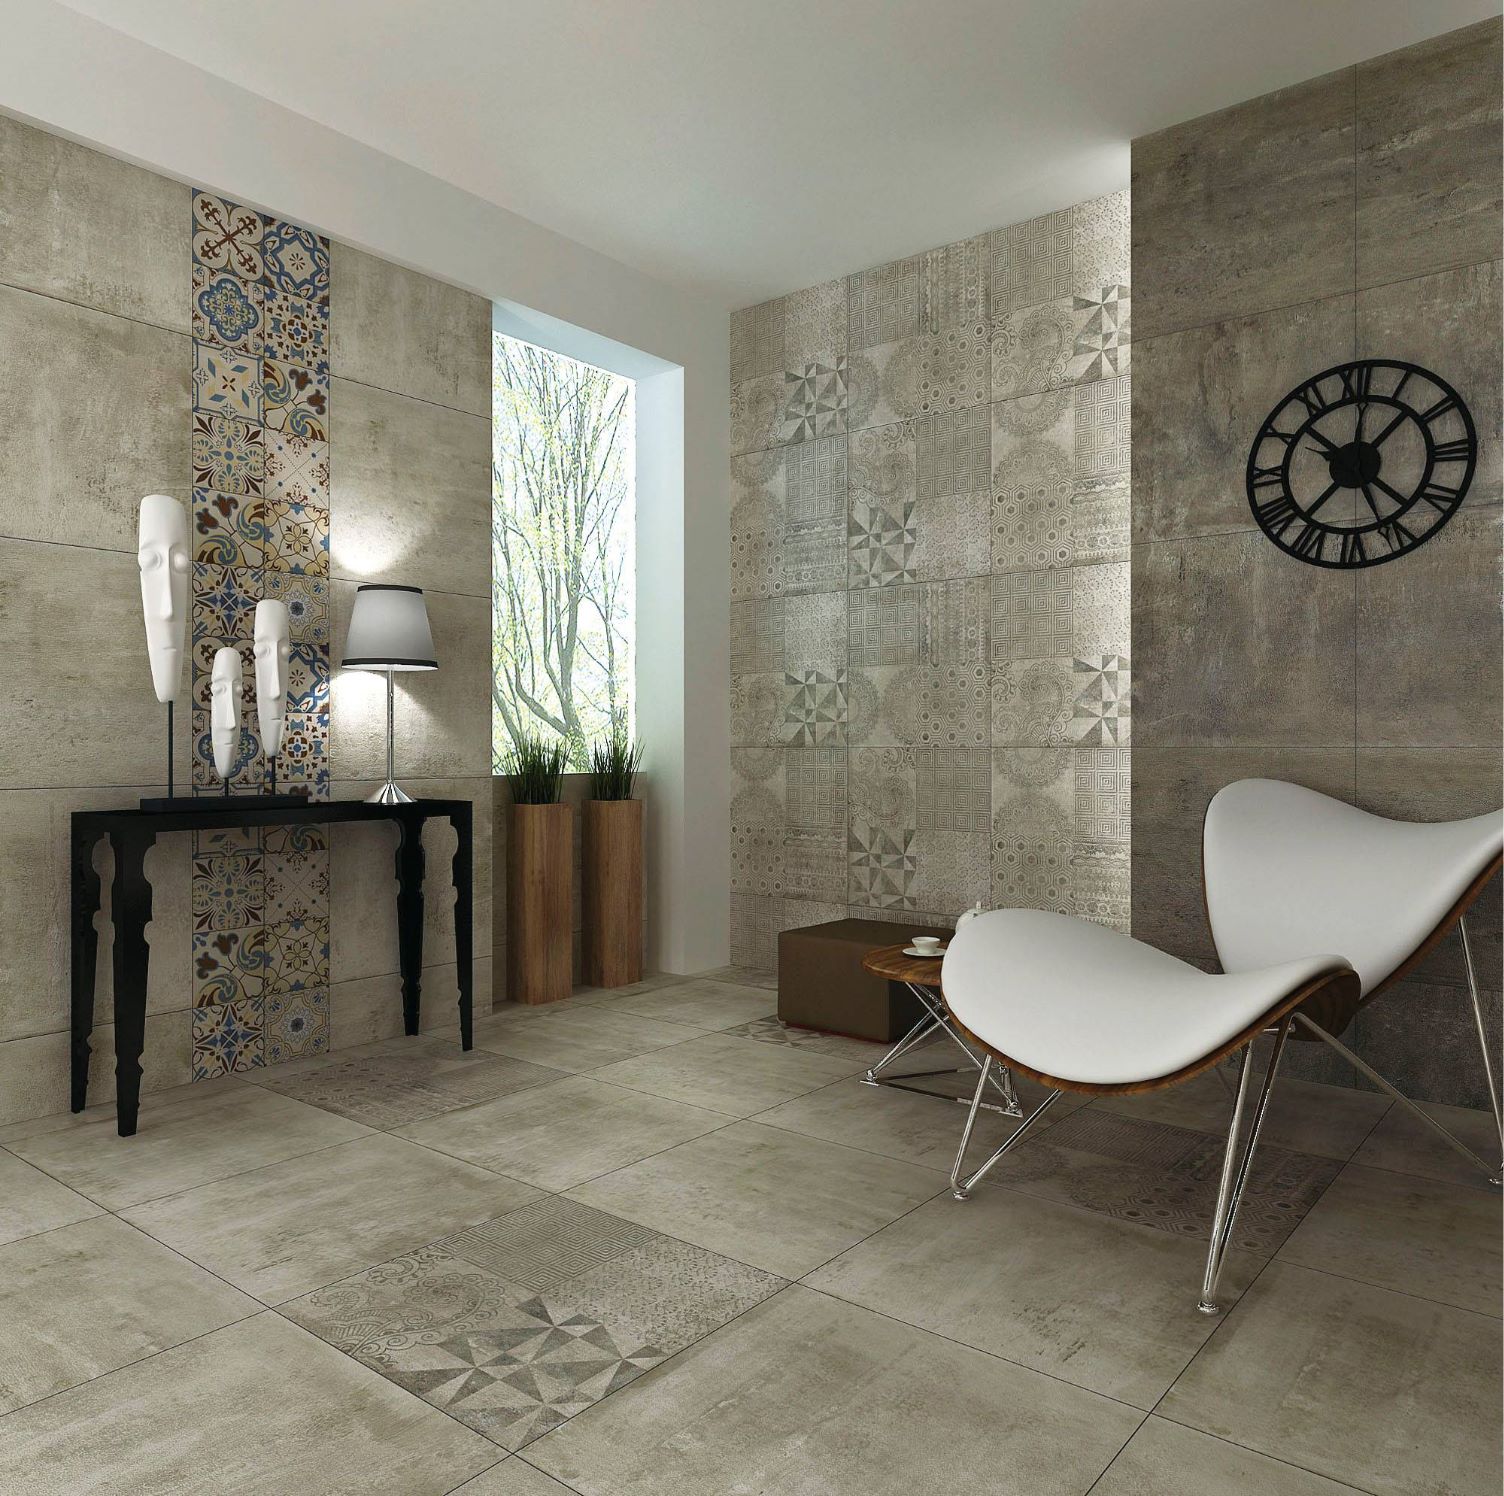 Cemento Graphite | Stones & More | Finest selection of Mosaics, Glass, Tile and Stone